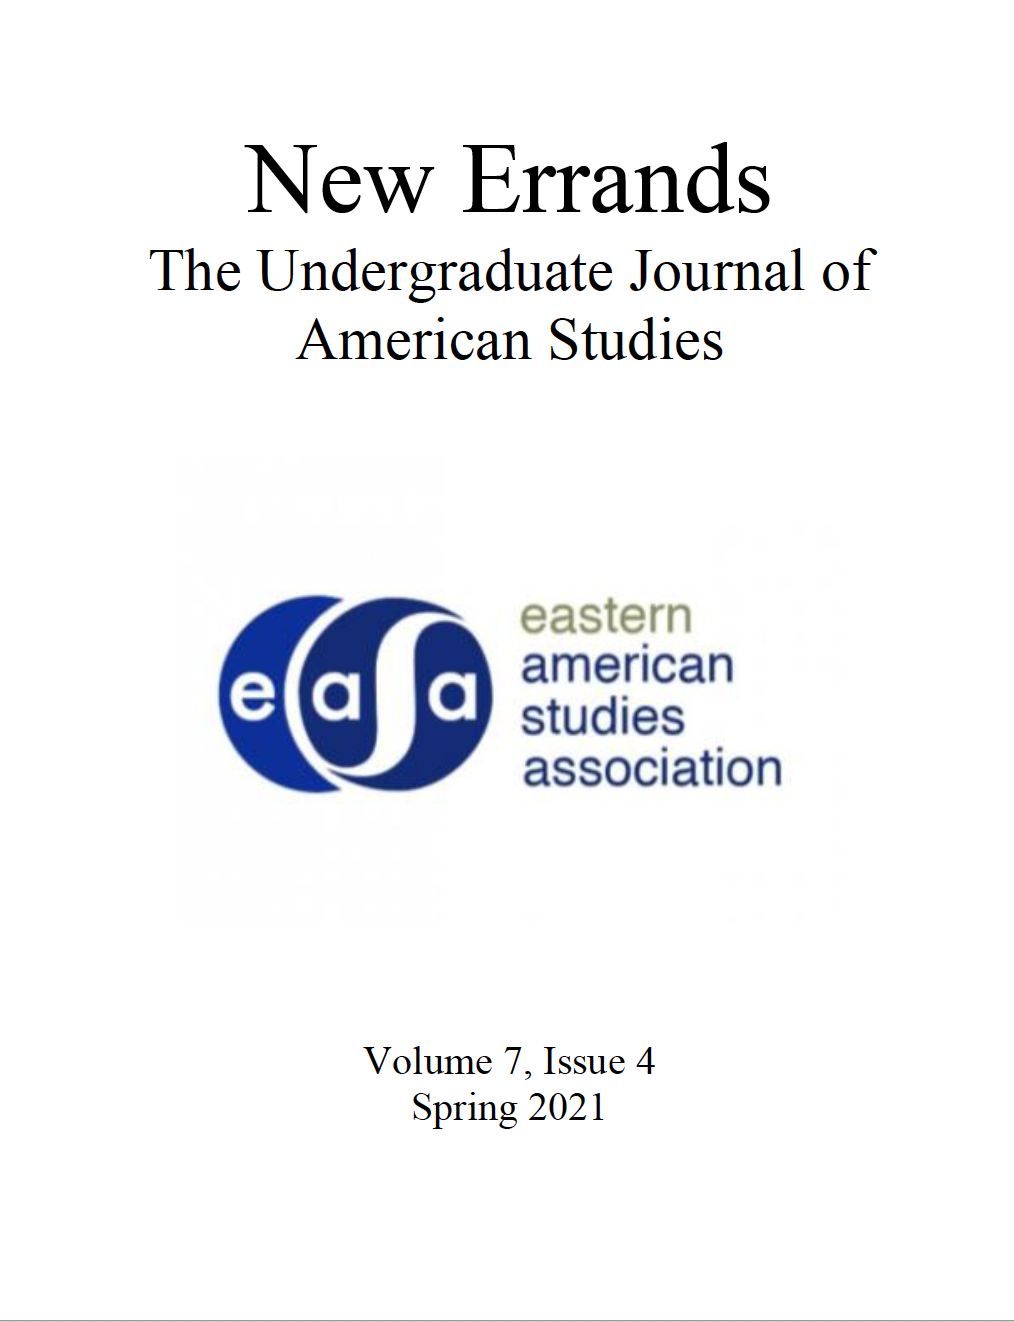 					View New Errands Volume 8, Issue 1 (Spring 2021)
				